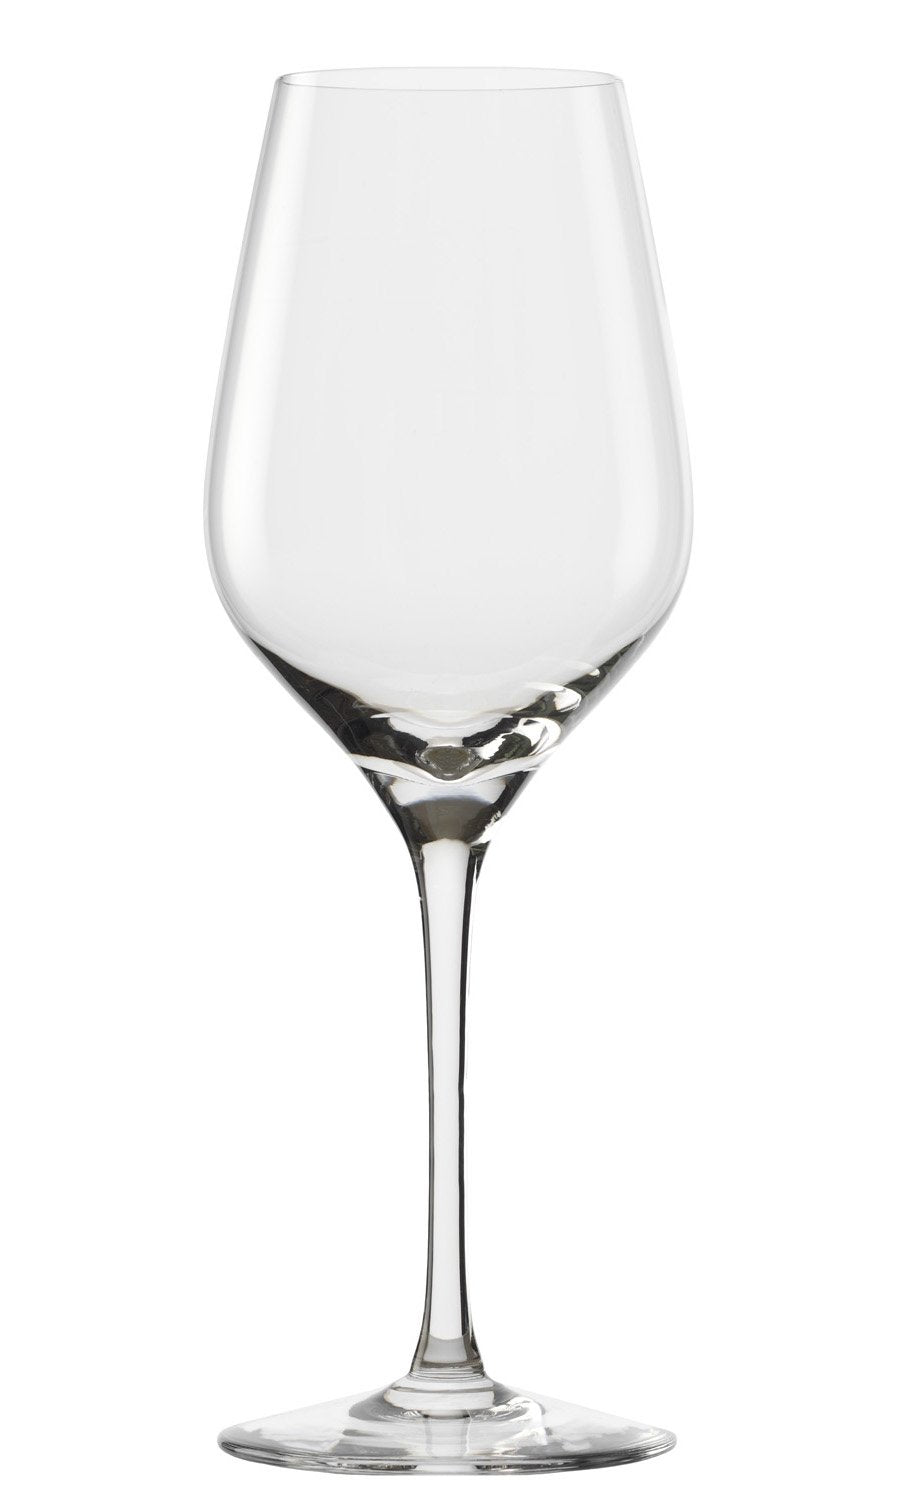 Stoelzle Exquisit Royal White Wine Glass Lead Free Crystal